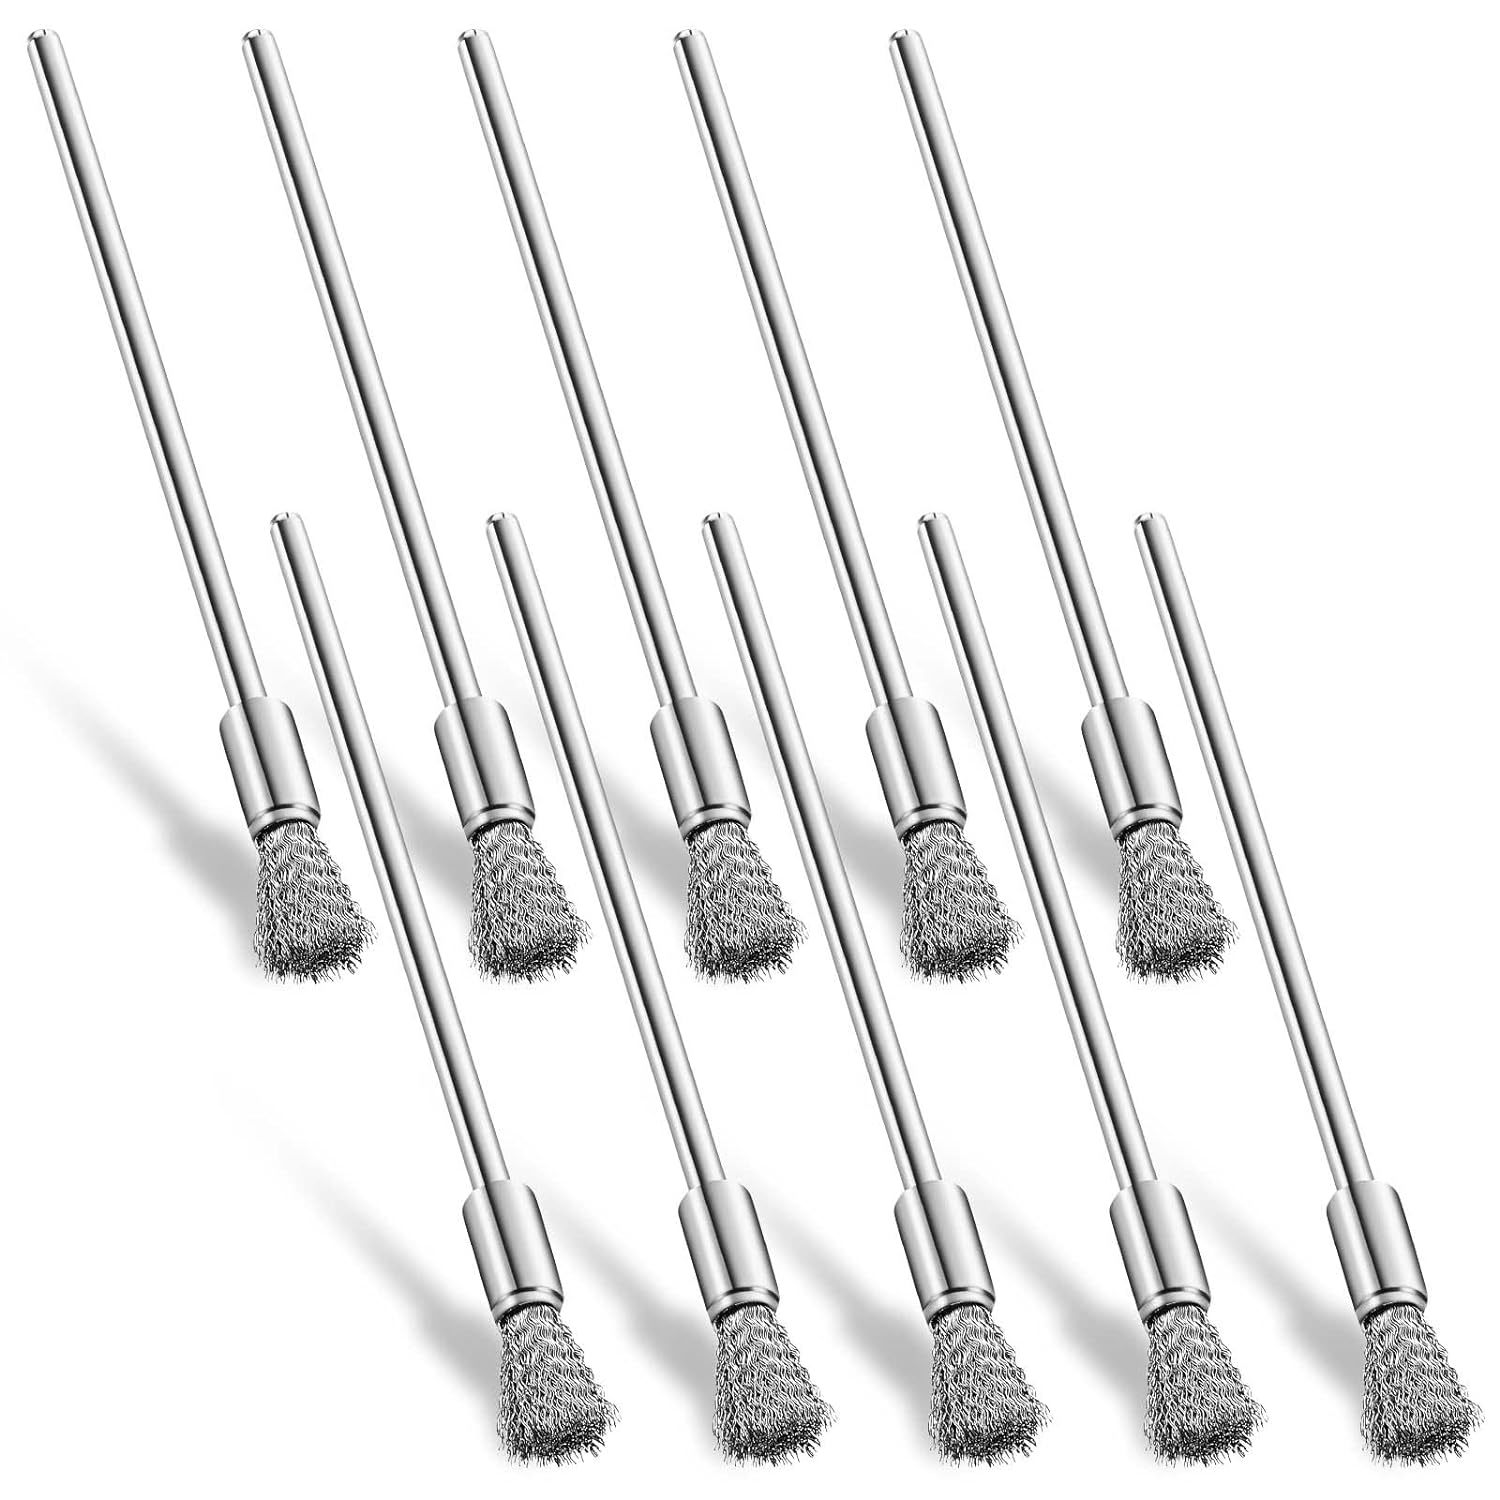 Primary image for 10 Pcs Wire Brush Extended Steel Cleaning End Brushes Pen Stainless Steel Wire B